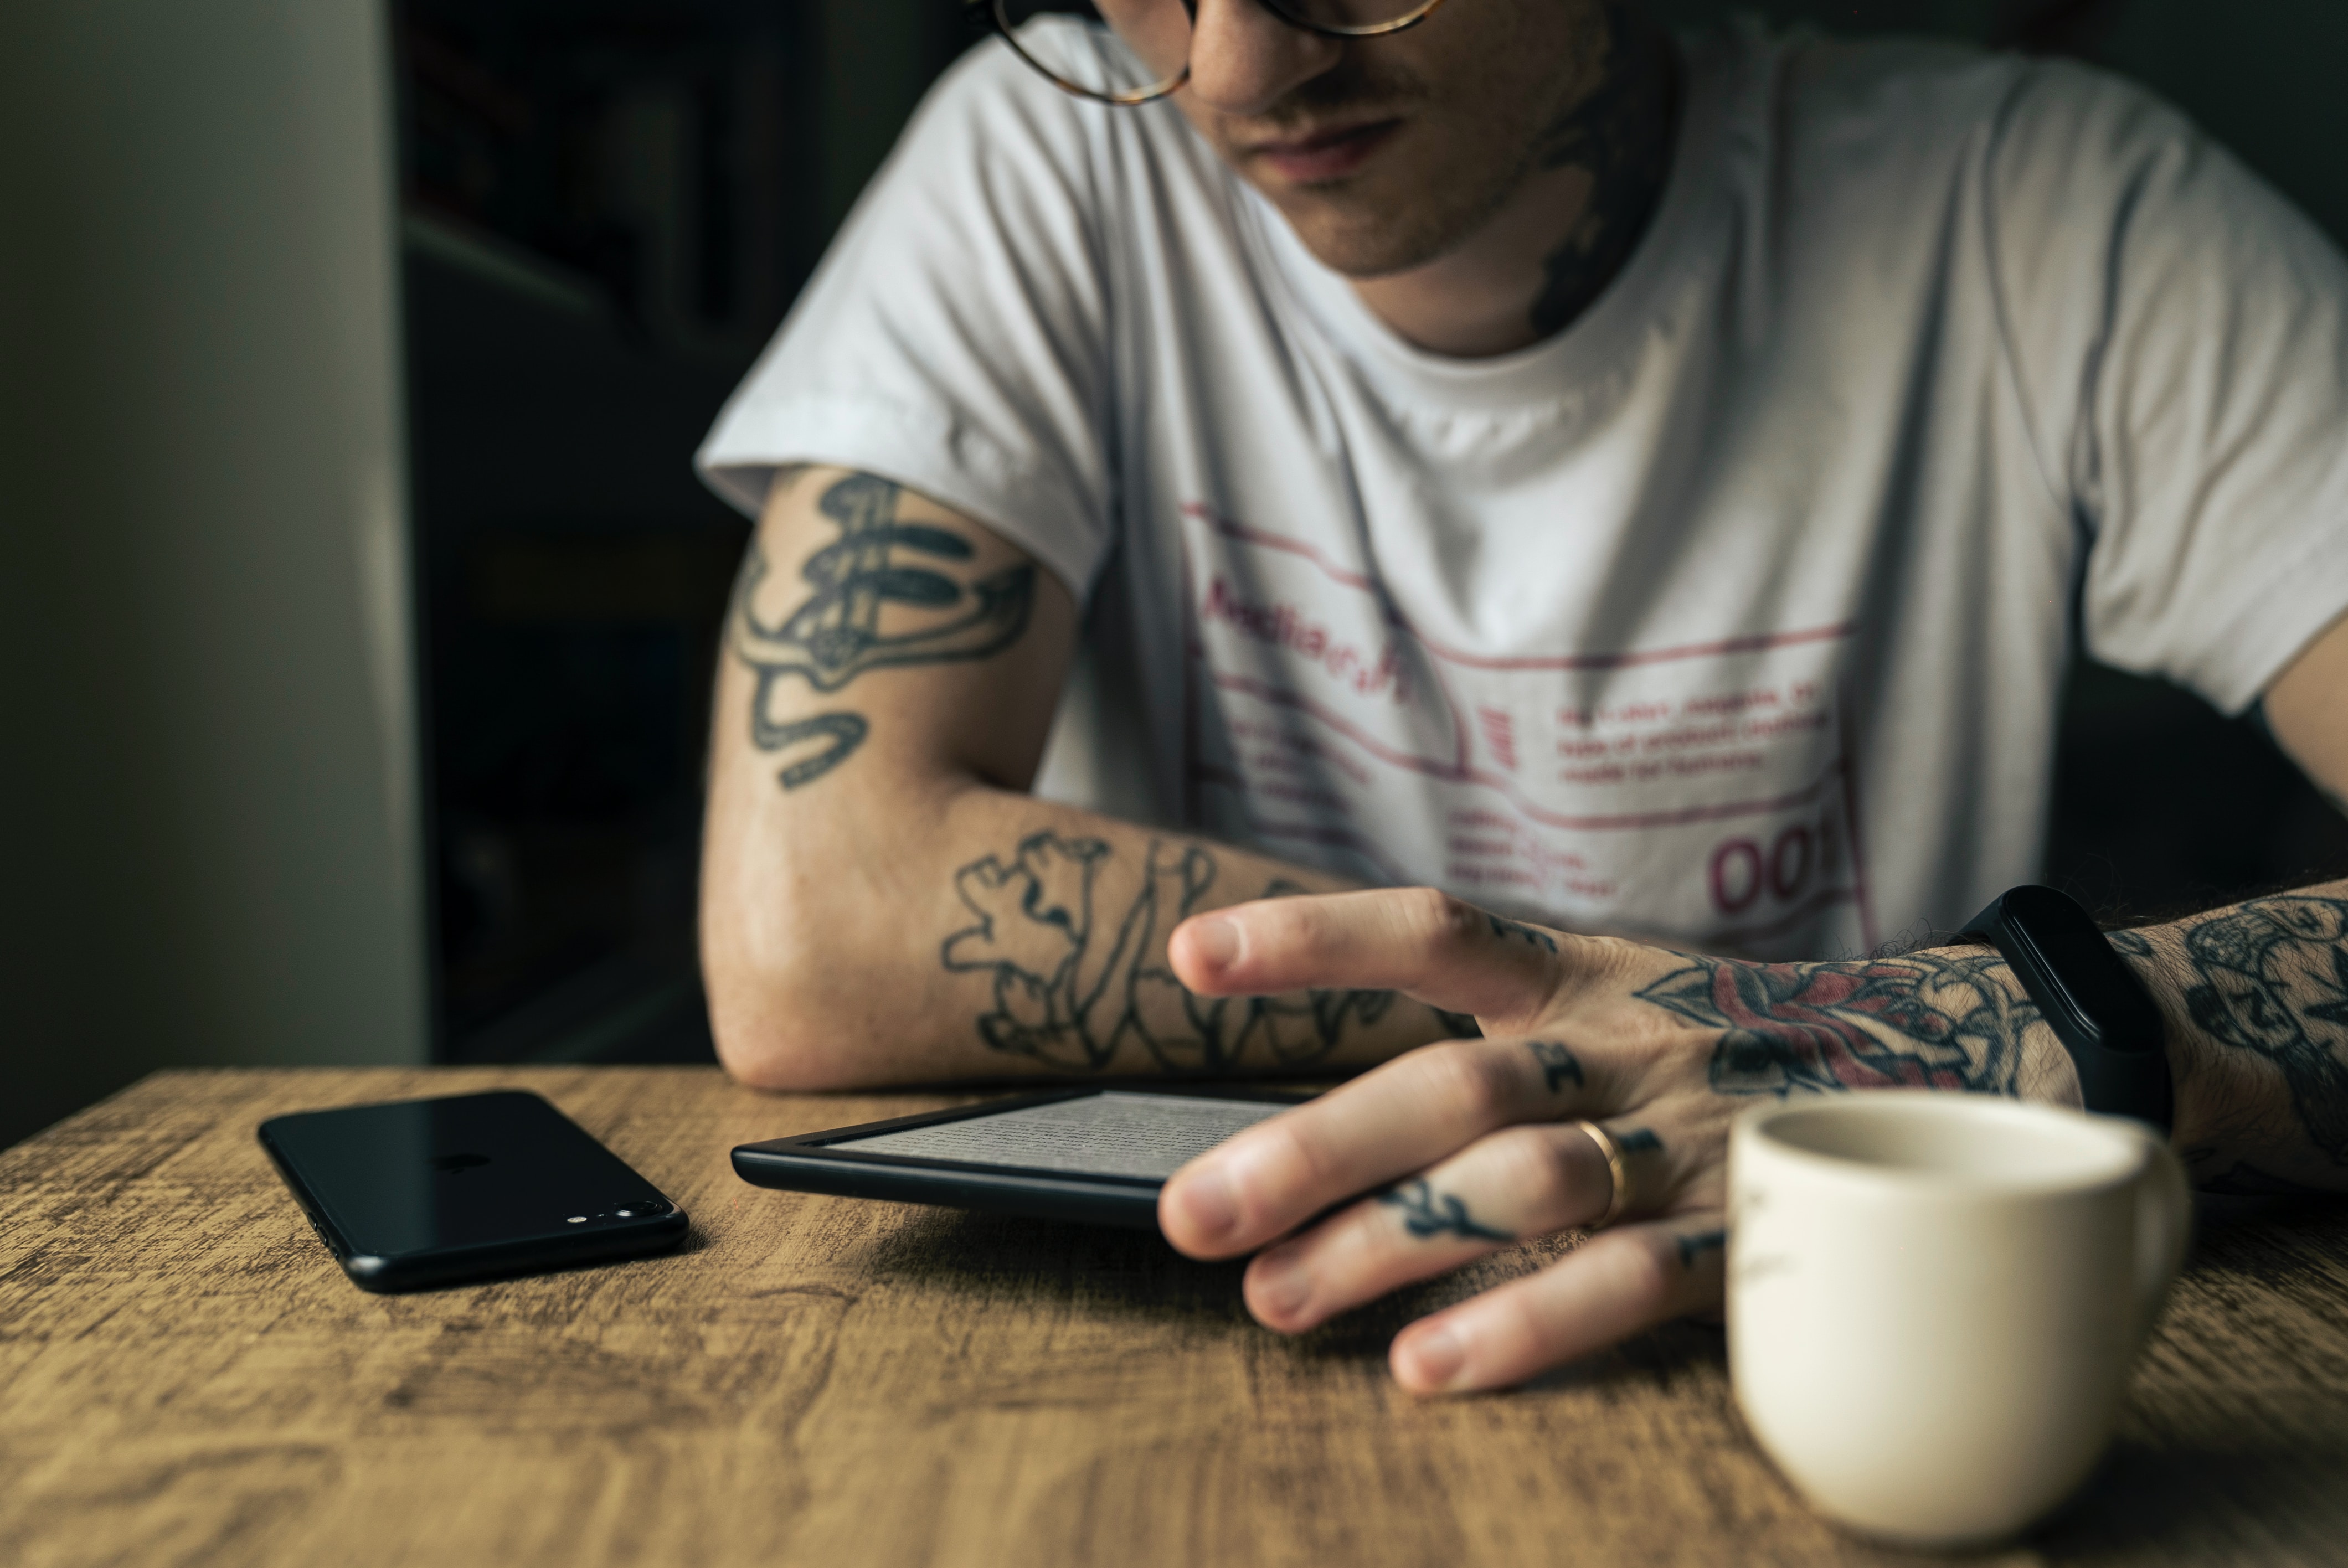 Background is of a white male with glasses and a white shirt, reading on his kindle with a cup of coffee on his left, and his phone on his right. He is sitting at a wooden table, and he has tattoos up both arms and hands.